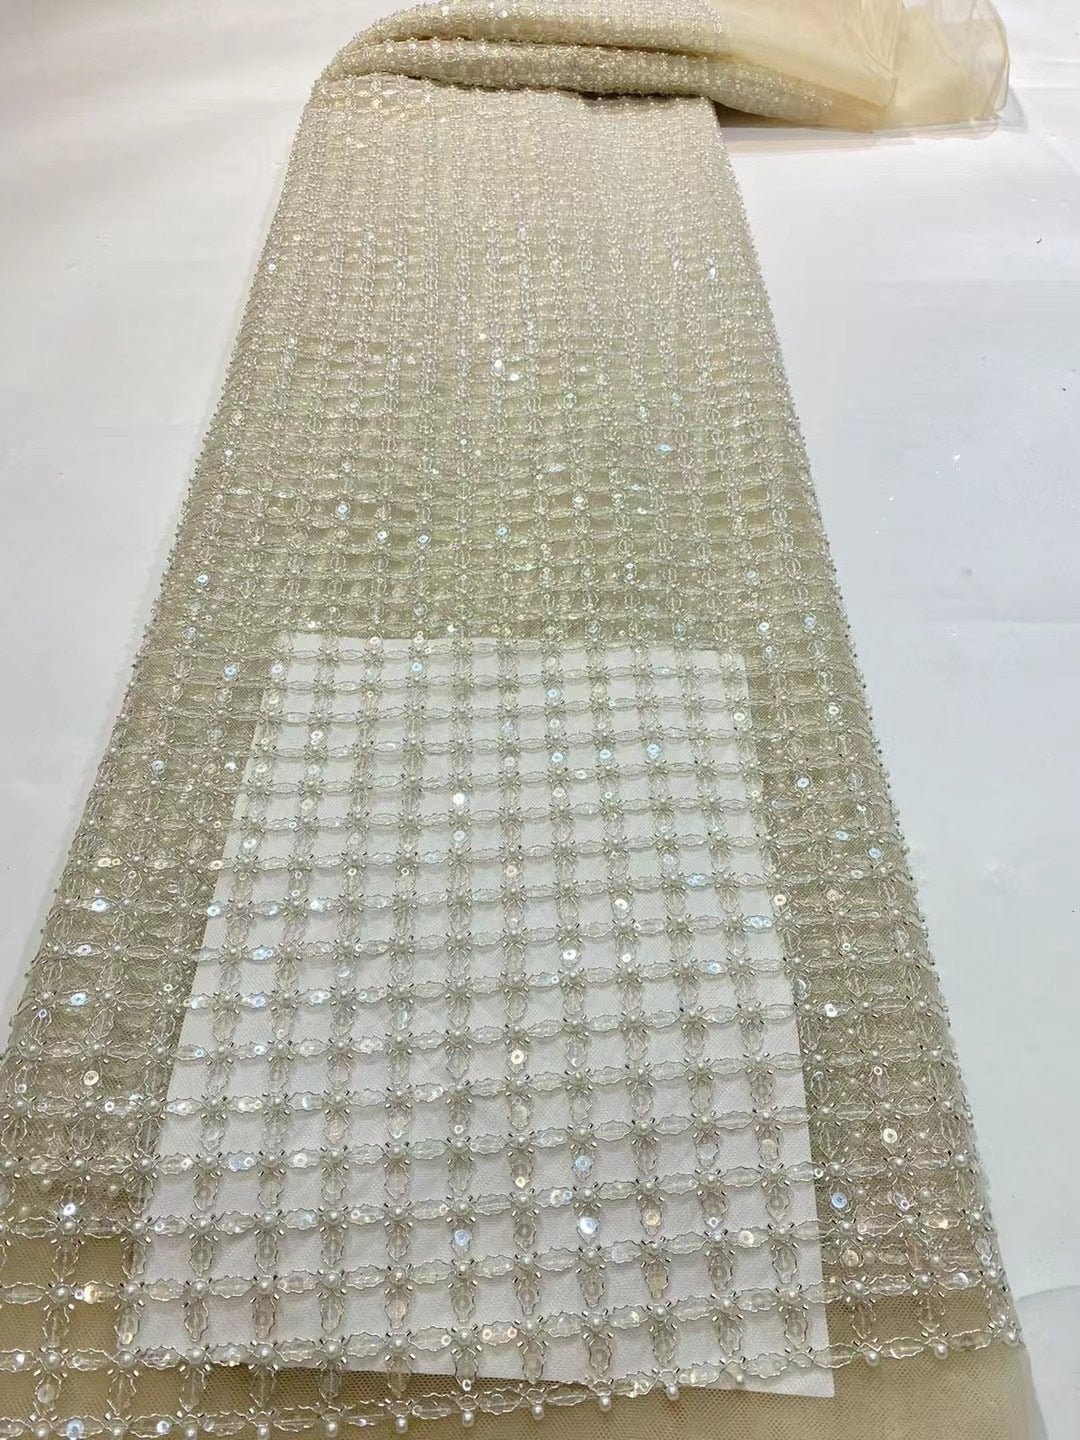 5 YARDS / 13 COLORS / Edwige 6-Beautiful Geometric Pearl Beads Glitter Sequin Beaded Embroidery Tulle Mesh Lace Party Prom Bridal Dress Fabric